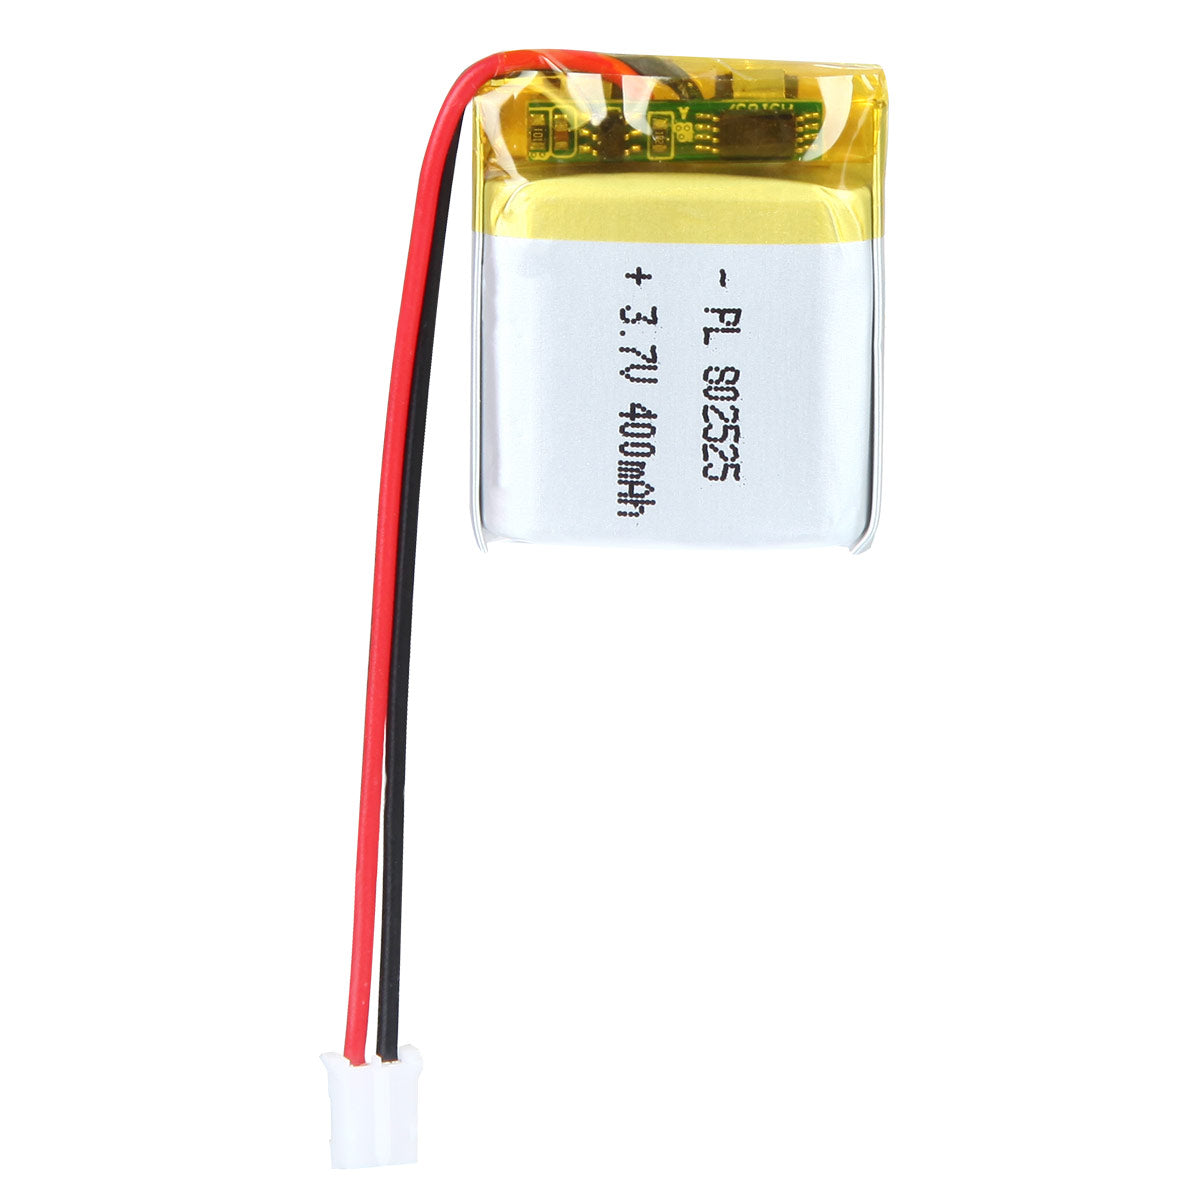 YDL 3.7V 400mAh 802525 Rechargeable Lithium Polymer Battery